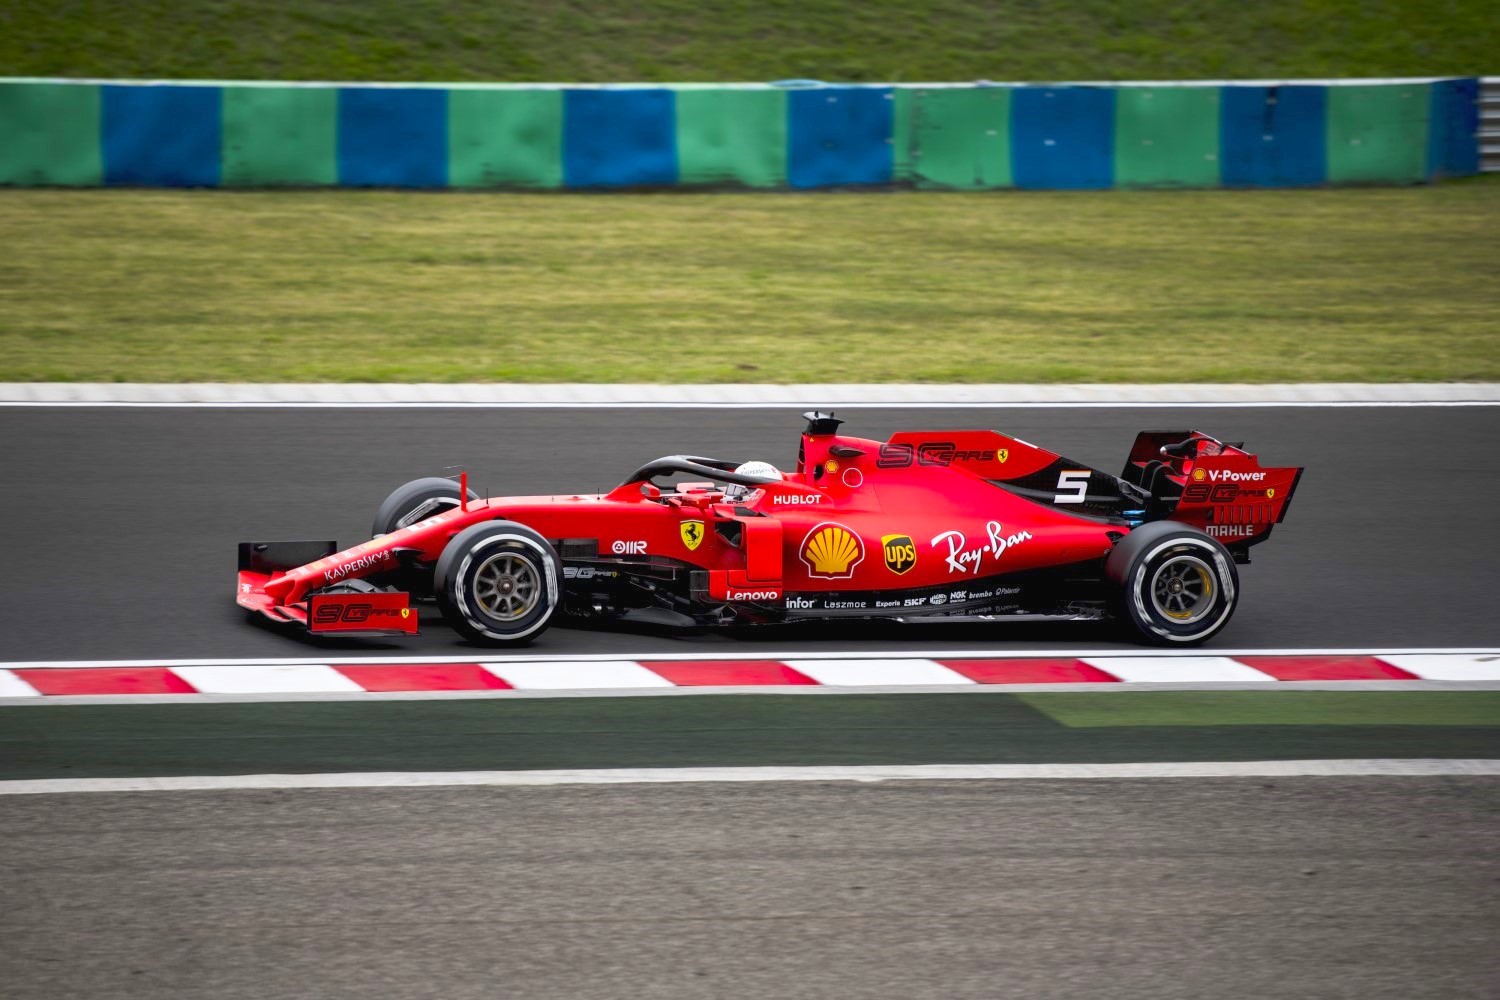 Vettel was third in Hungary, over a minute behind at the end